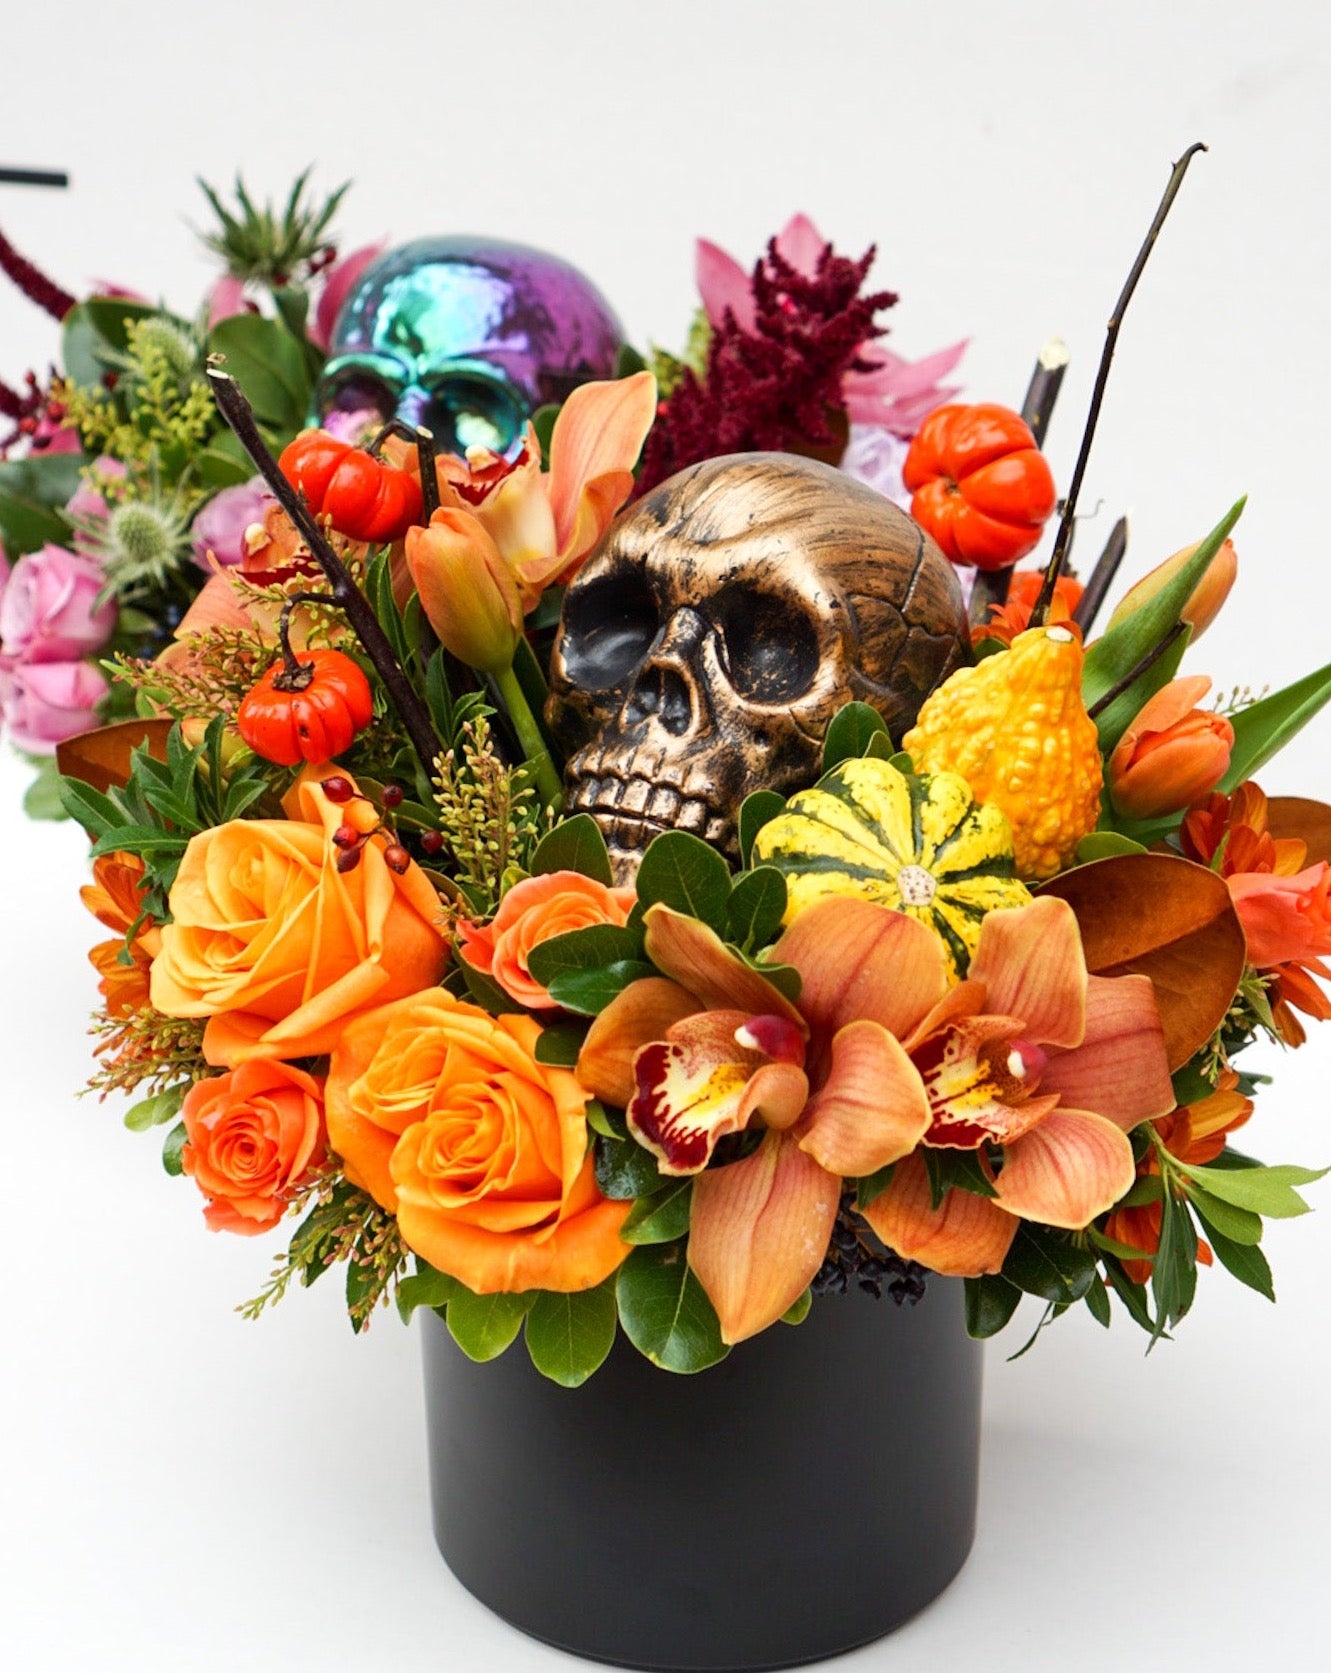 This Halloween flower arrangement is the perfect balance of scary and classy as it incorporates elements of Halloween, hence the skull, but also happy elements such as mini pumpkins, roses, orchids, celosia, etc.